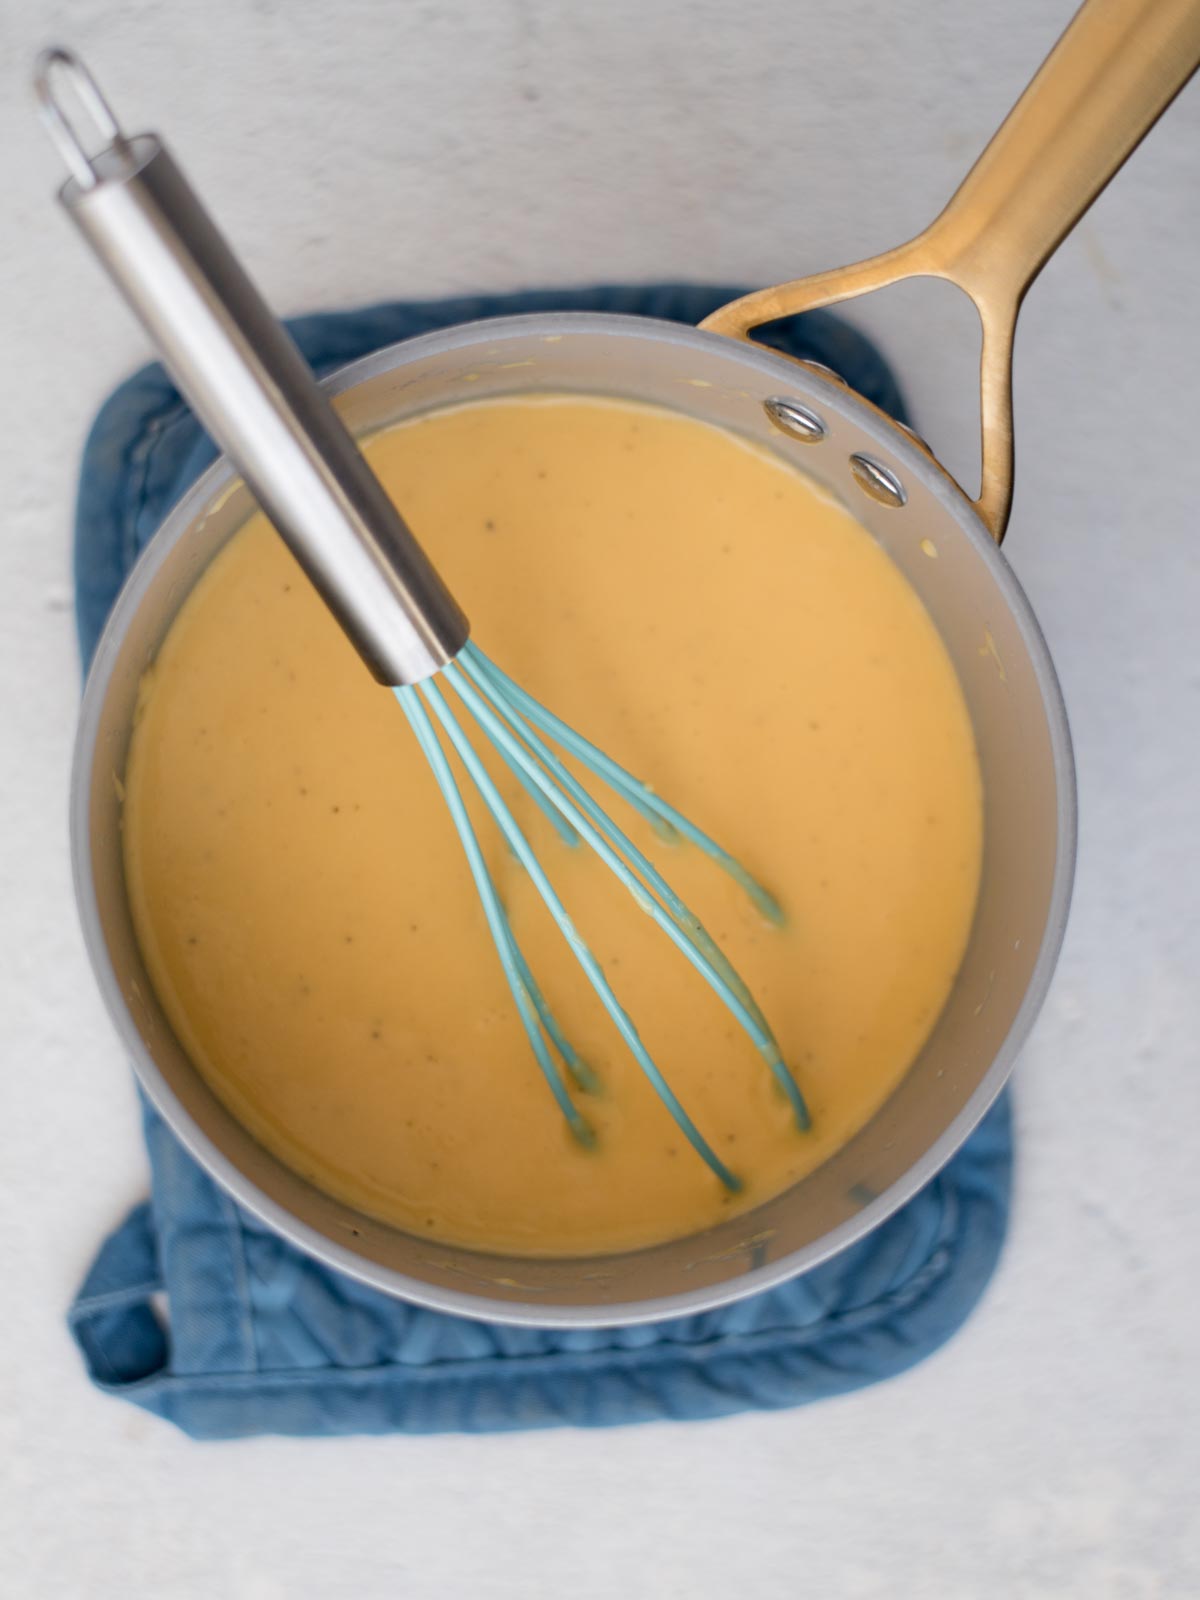 Whisk resting in a saucepan of cheese sauce.